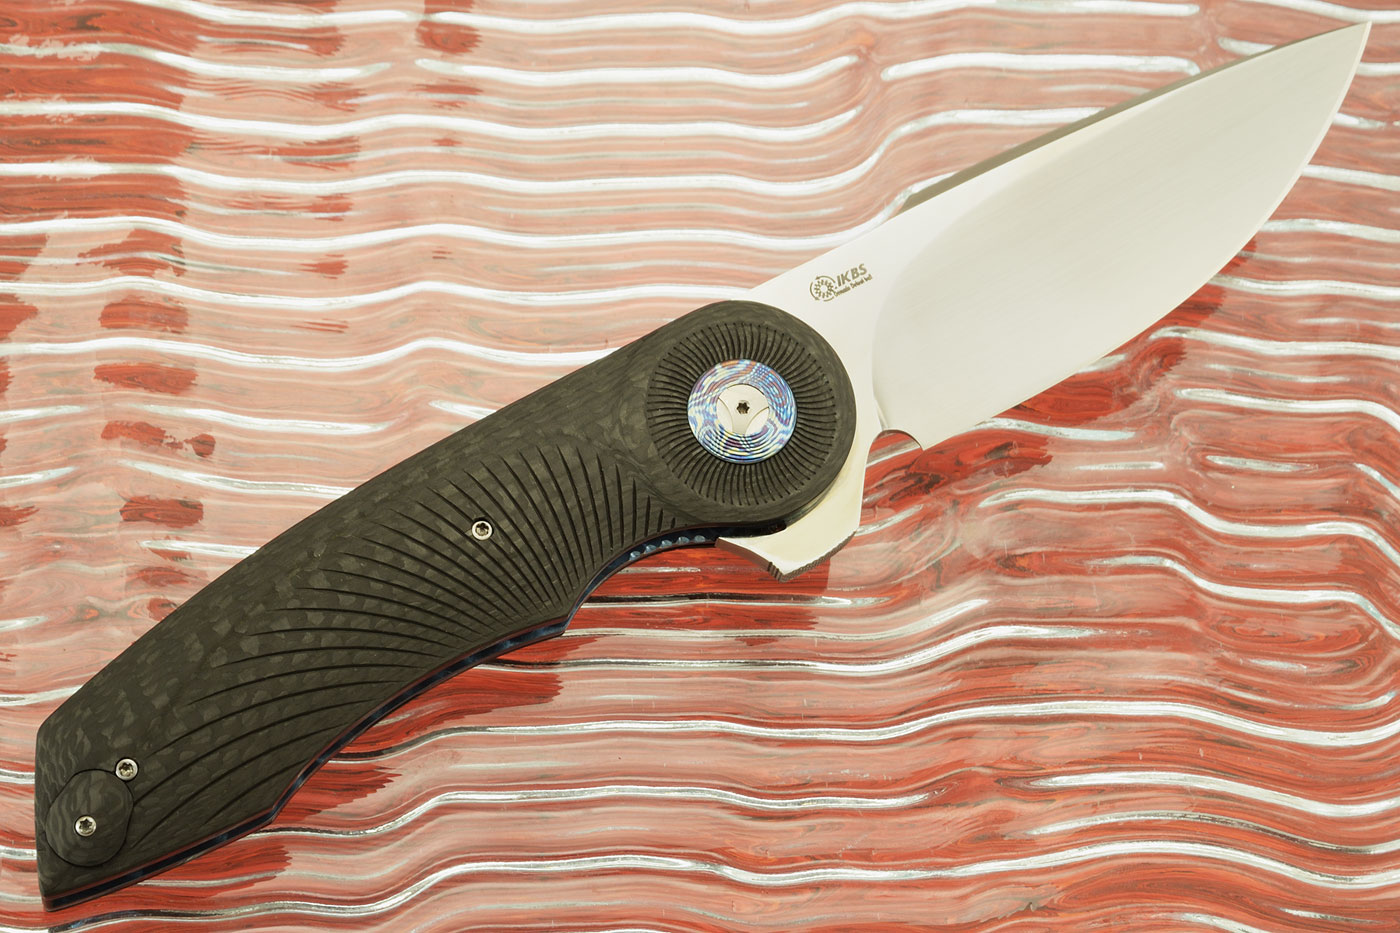 Gold Standard Flipper with Carbon Fiber and White Timascus (Double Row IKBS) - M390 - LEFT HANDED!!